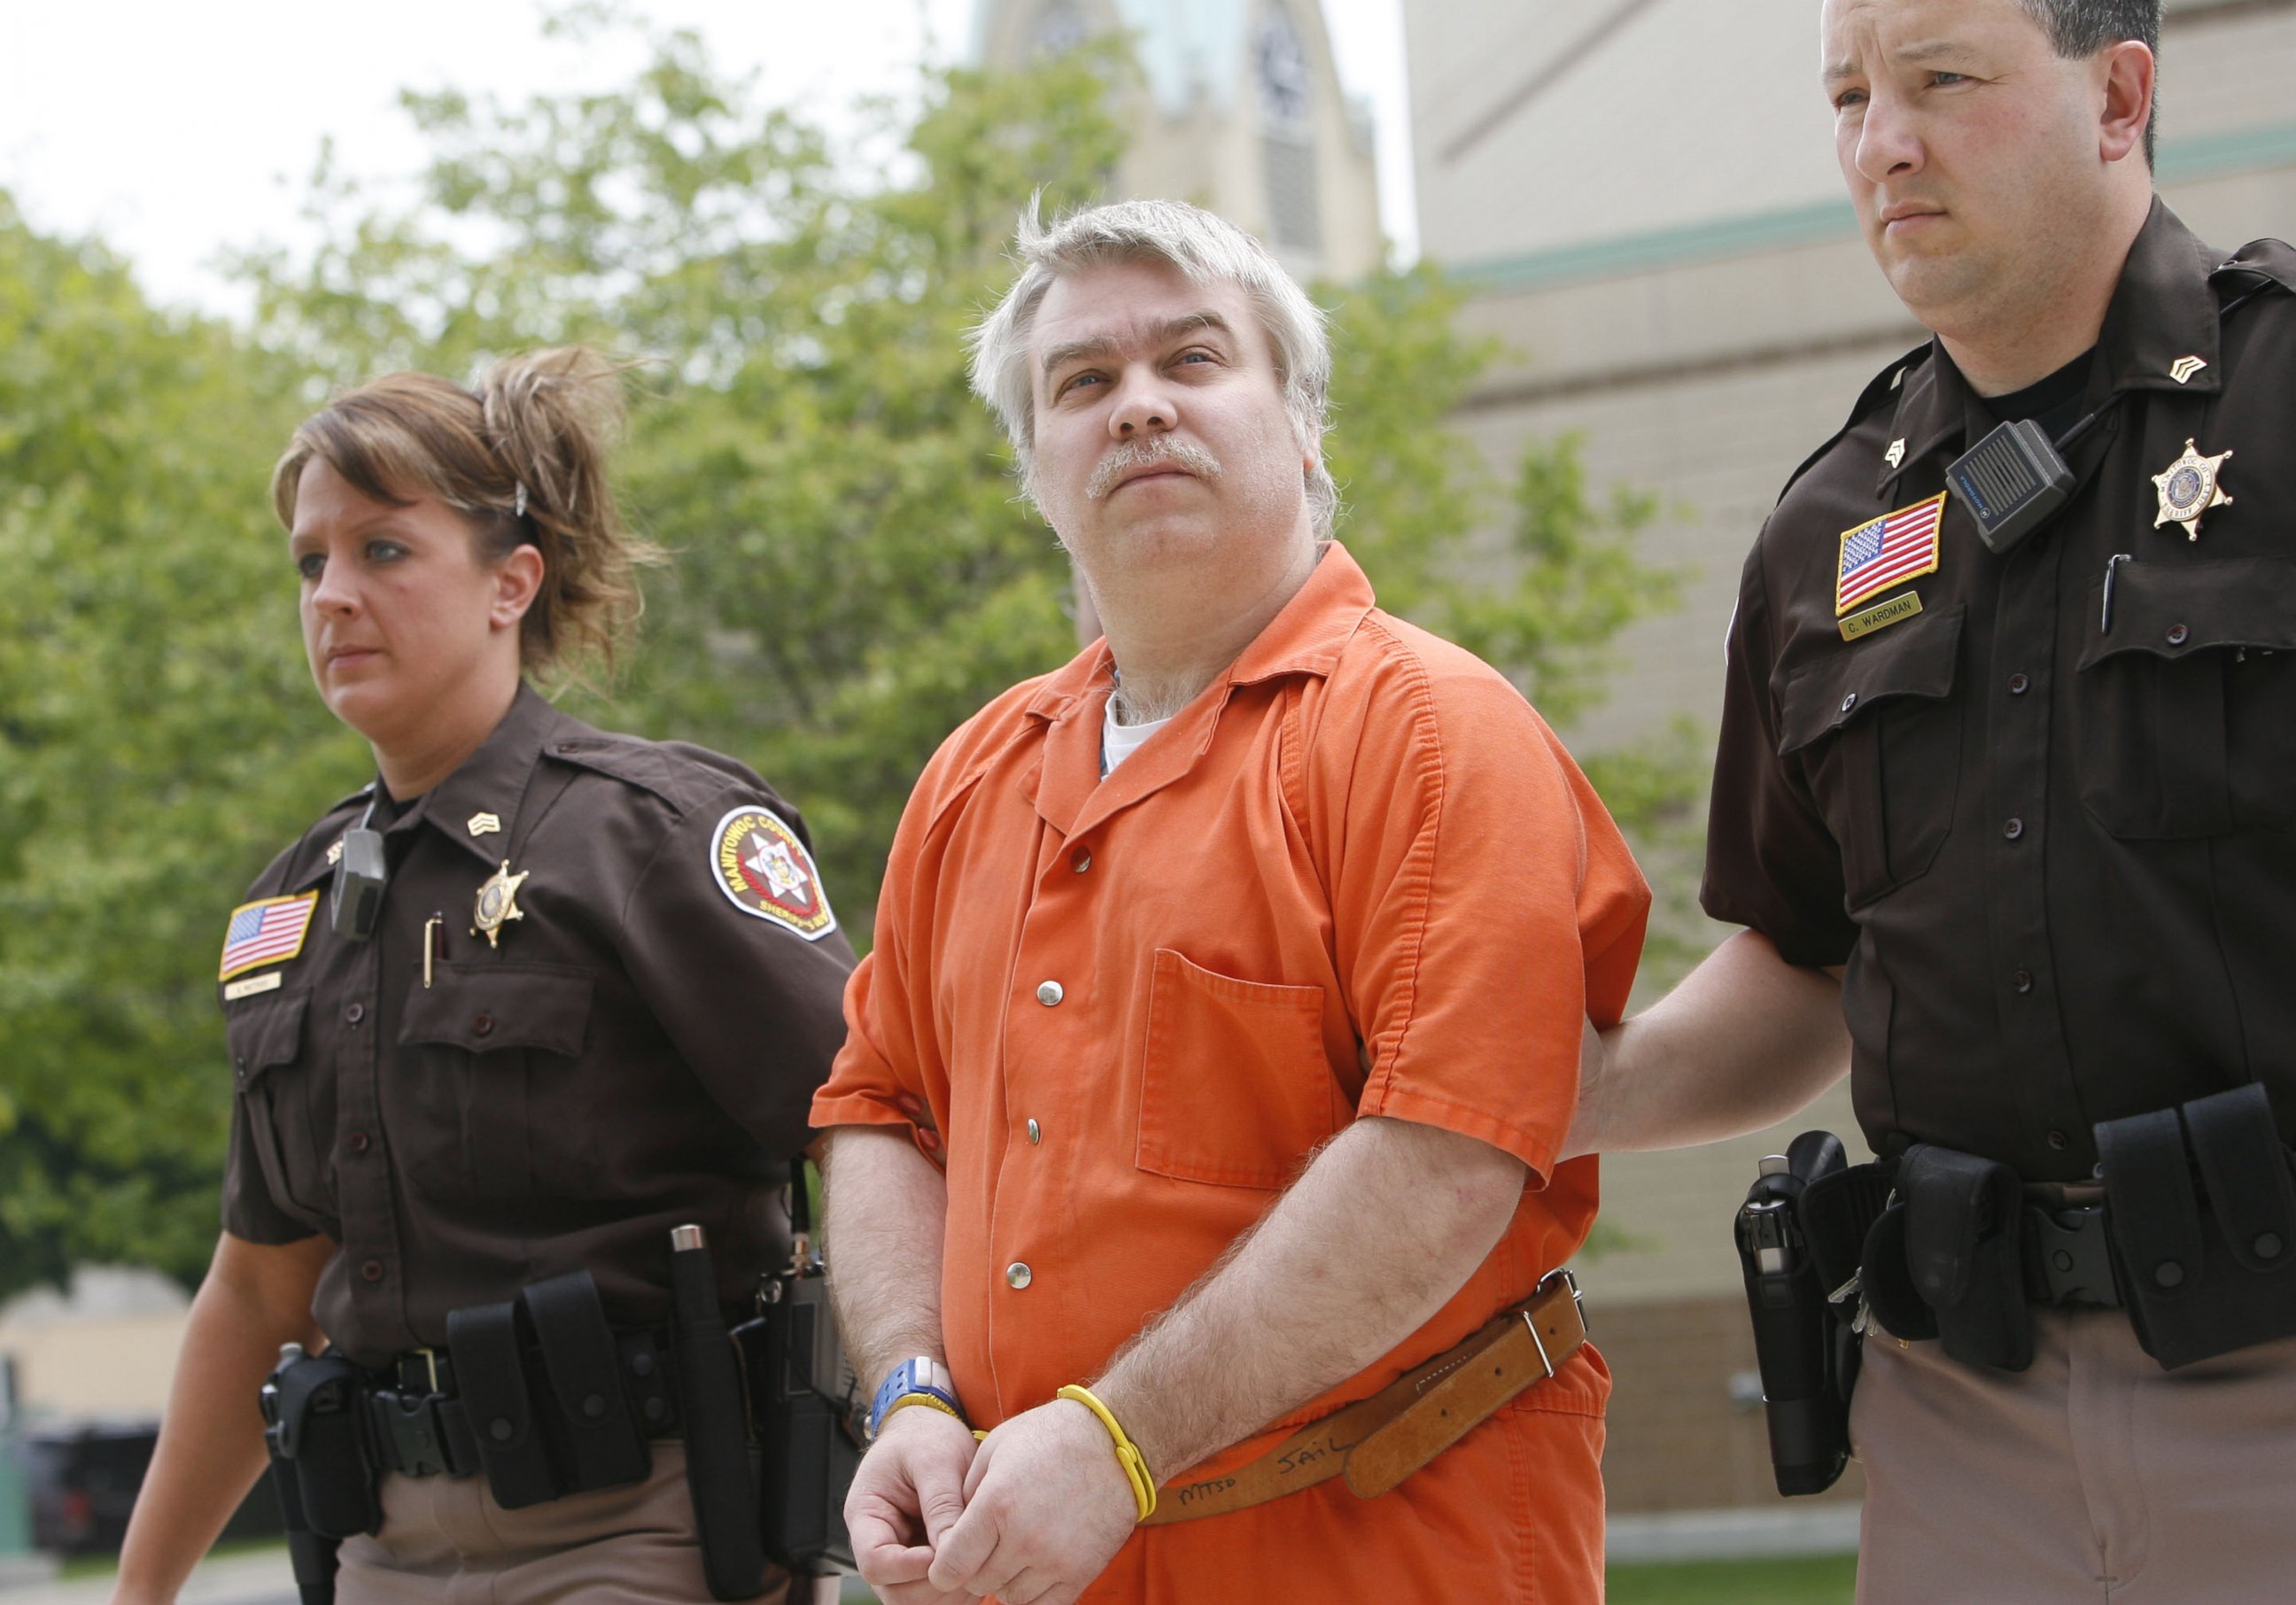 PHOTO: Steven Avery is escorted to the Manitowoc County Courthouse for sentencing, June 1, 2007, in Manitowoc, Wis.